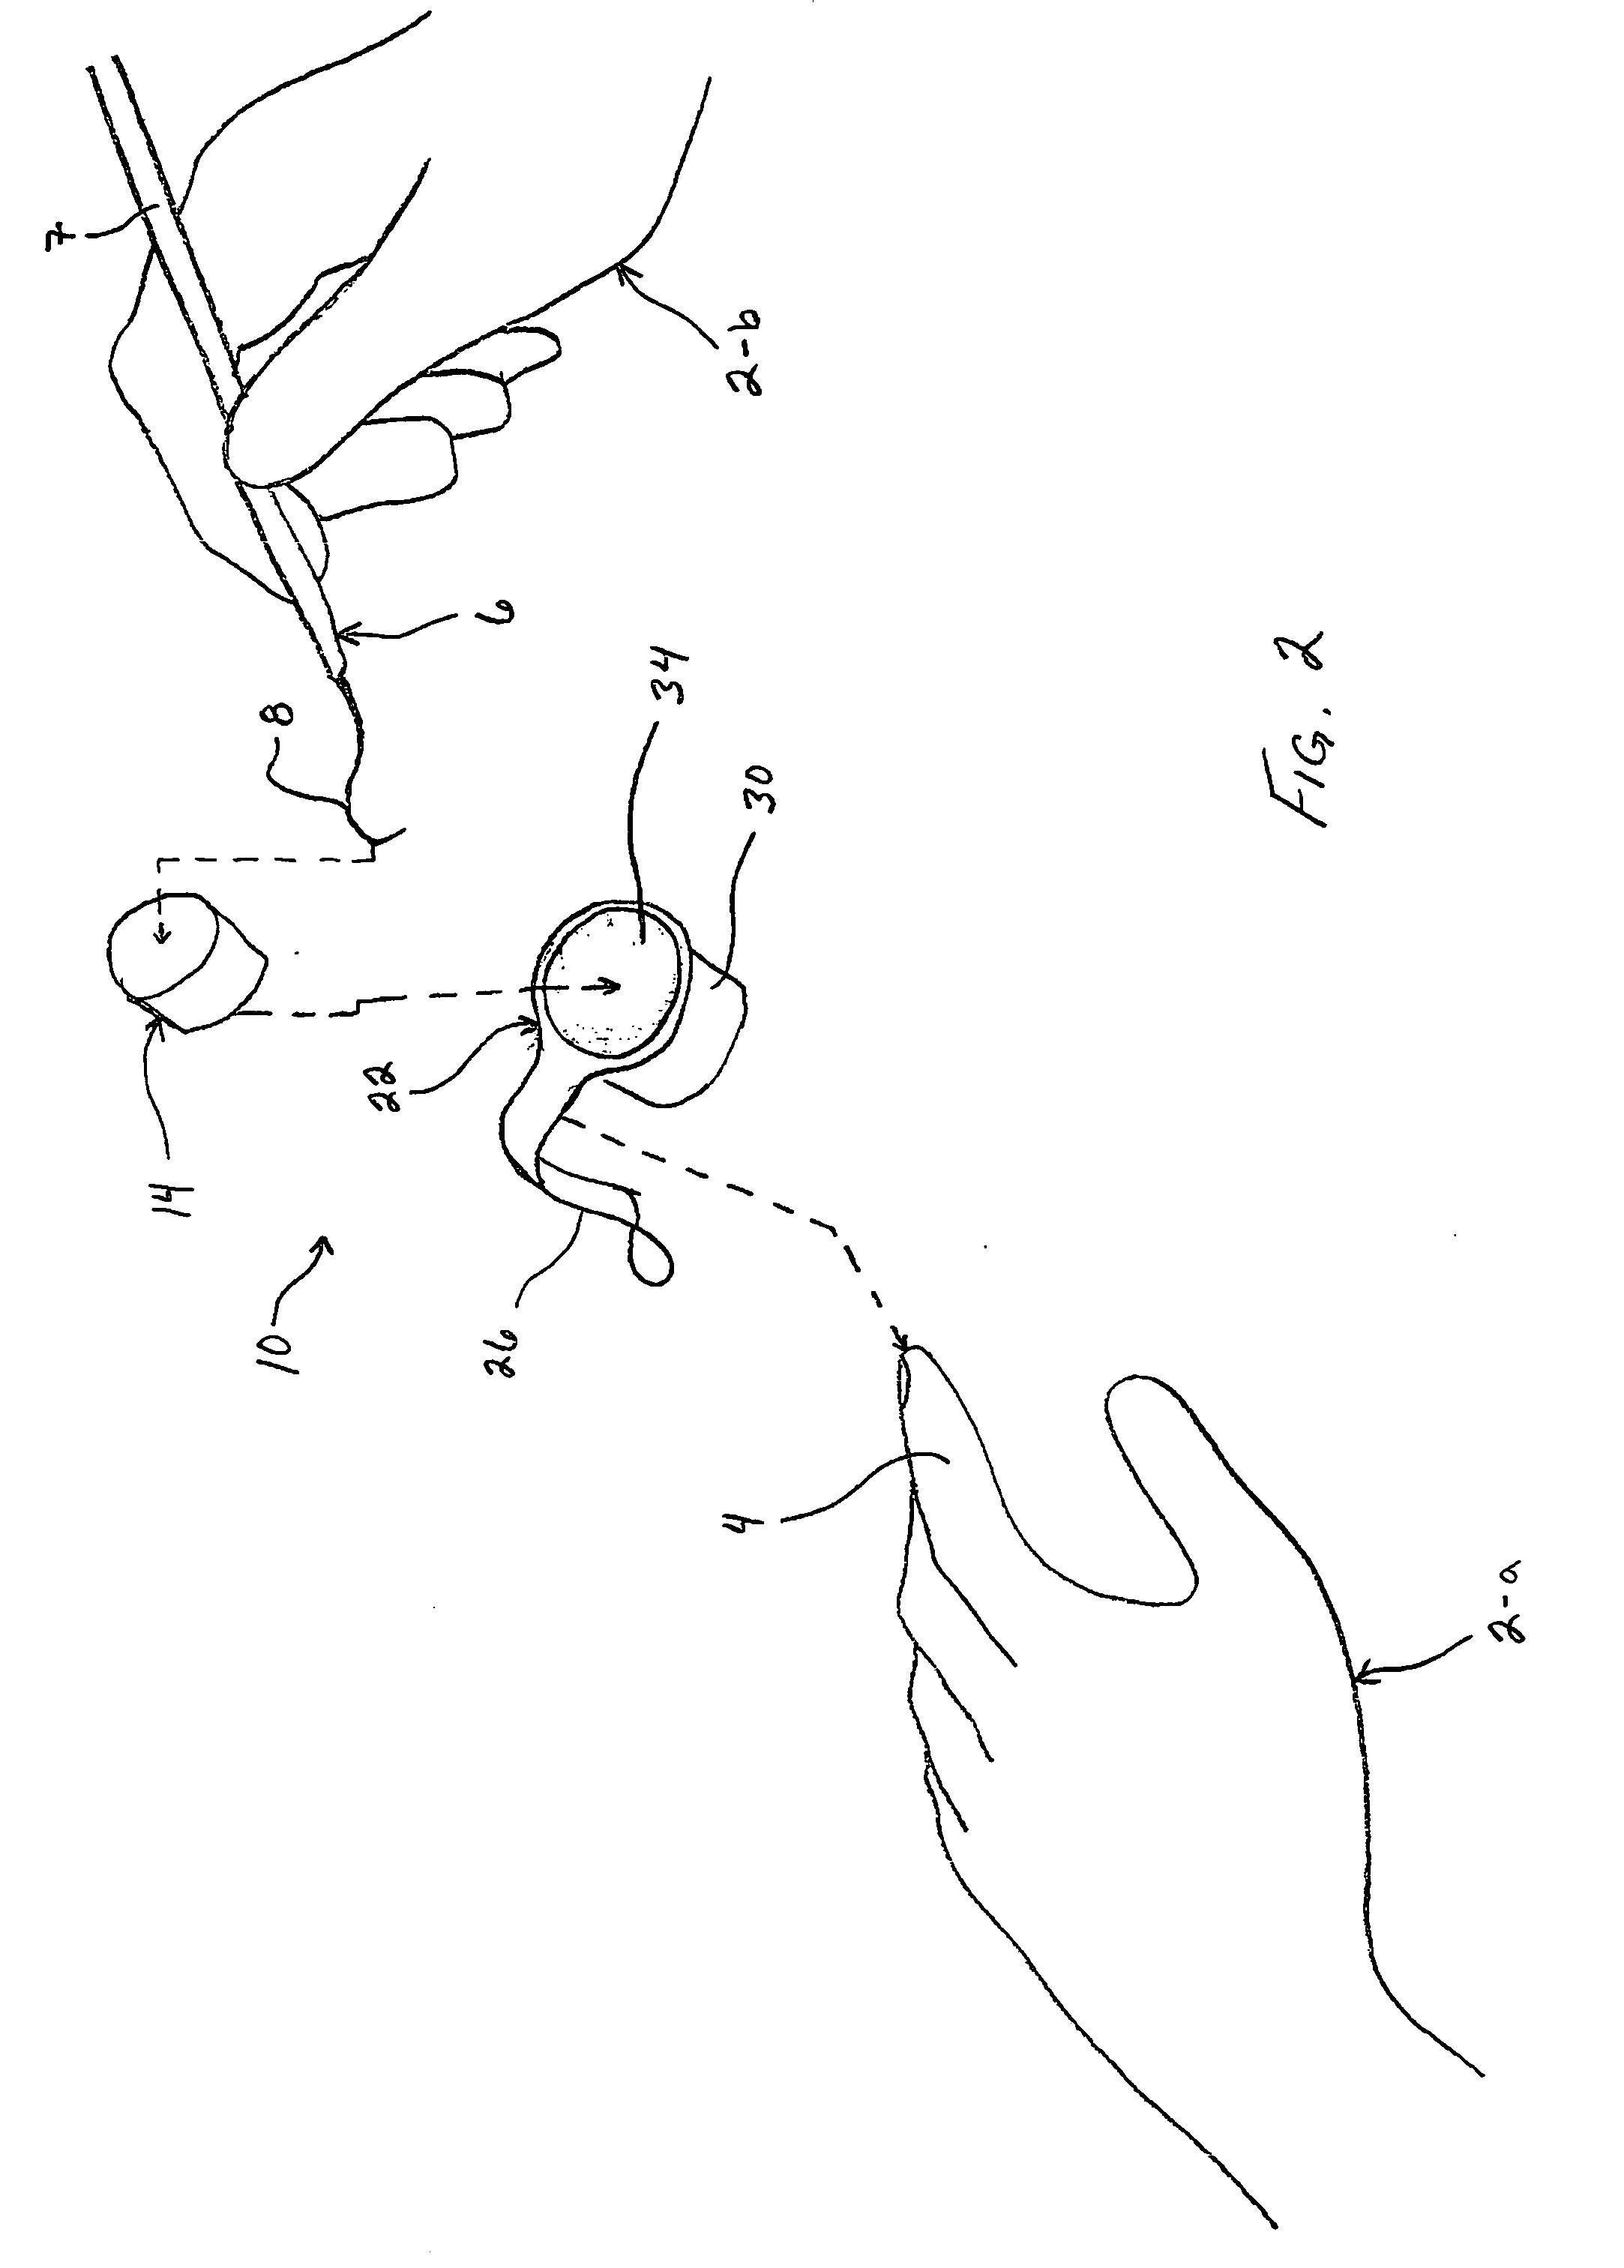 Method and apparatus for disinfecting dental tools during an examination procedure